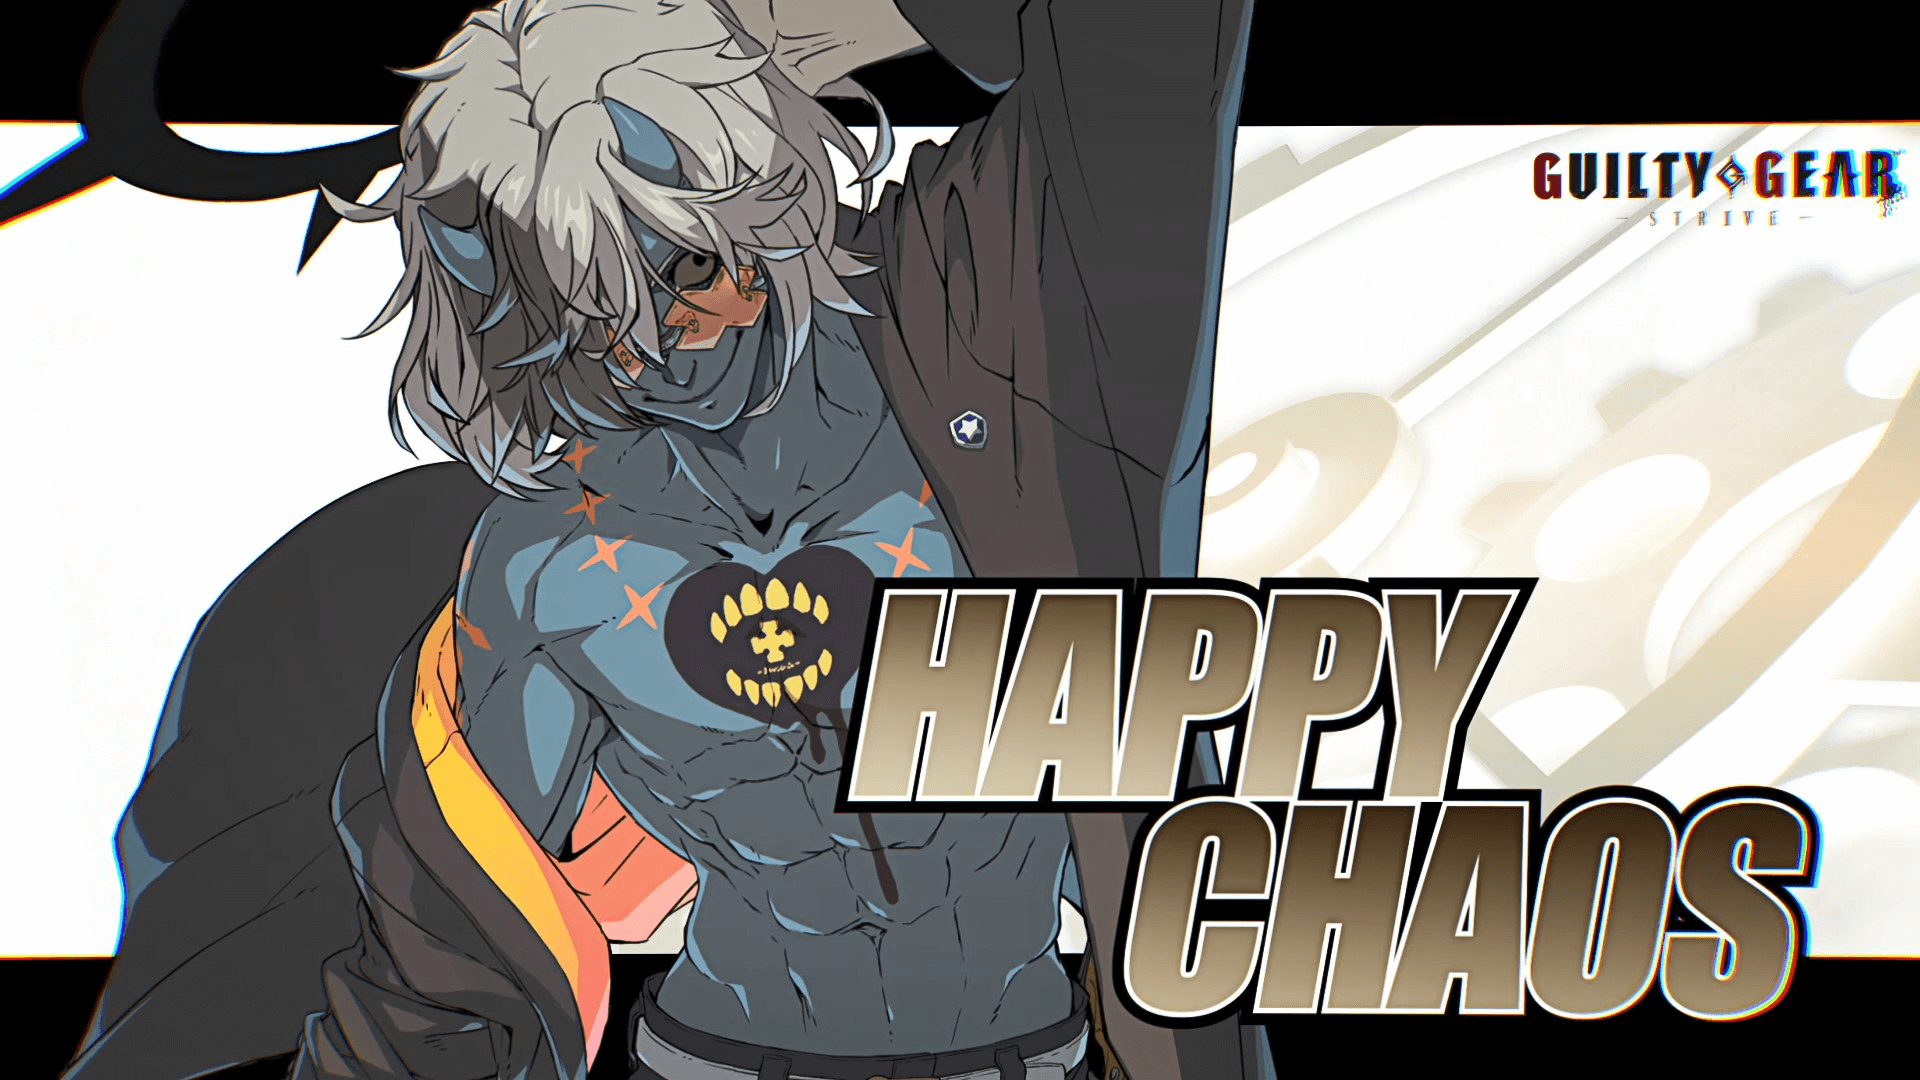 Happy Chaos Joins the Roster of Guilty Gear Strive